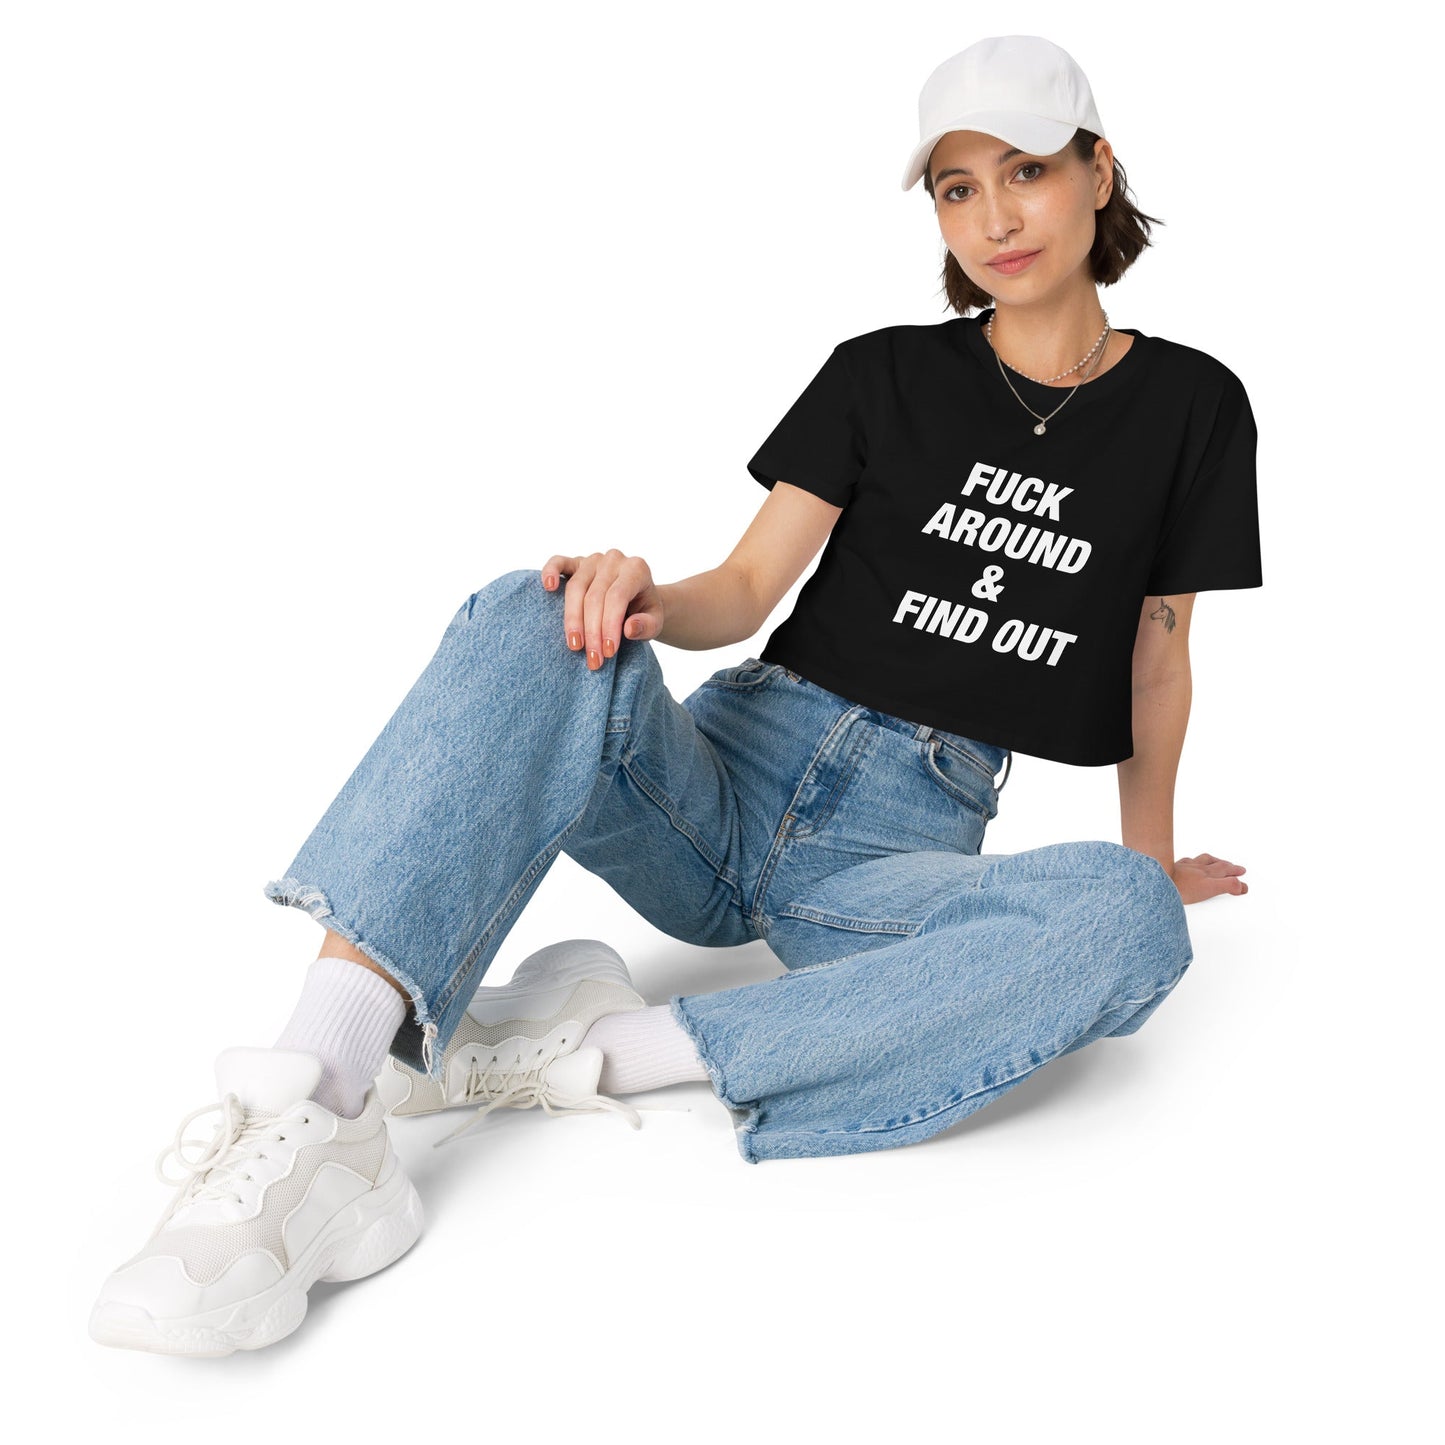 Farris Wheel "Fuck Around and Find Out" Crop Top - BeExtra! Apparel & More